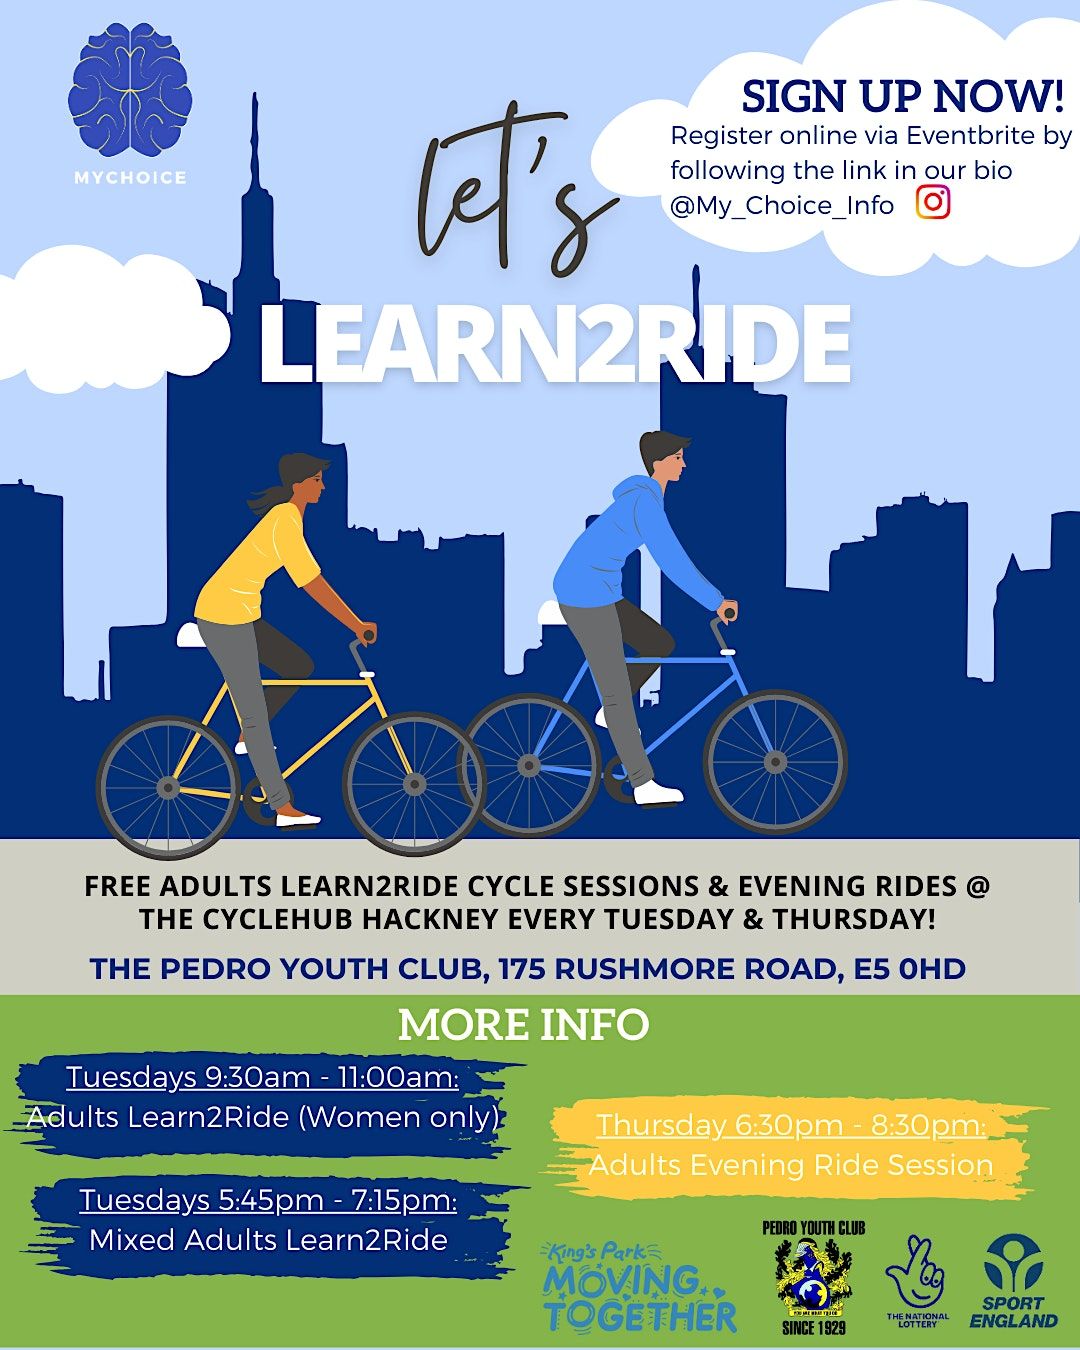 Women Only Learn2Ride Cycle Sessions @The Pedro Youth Club